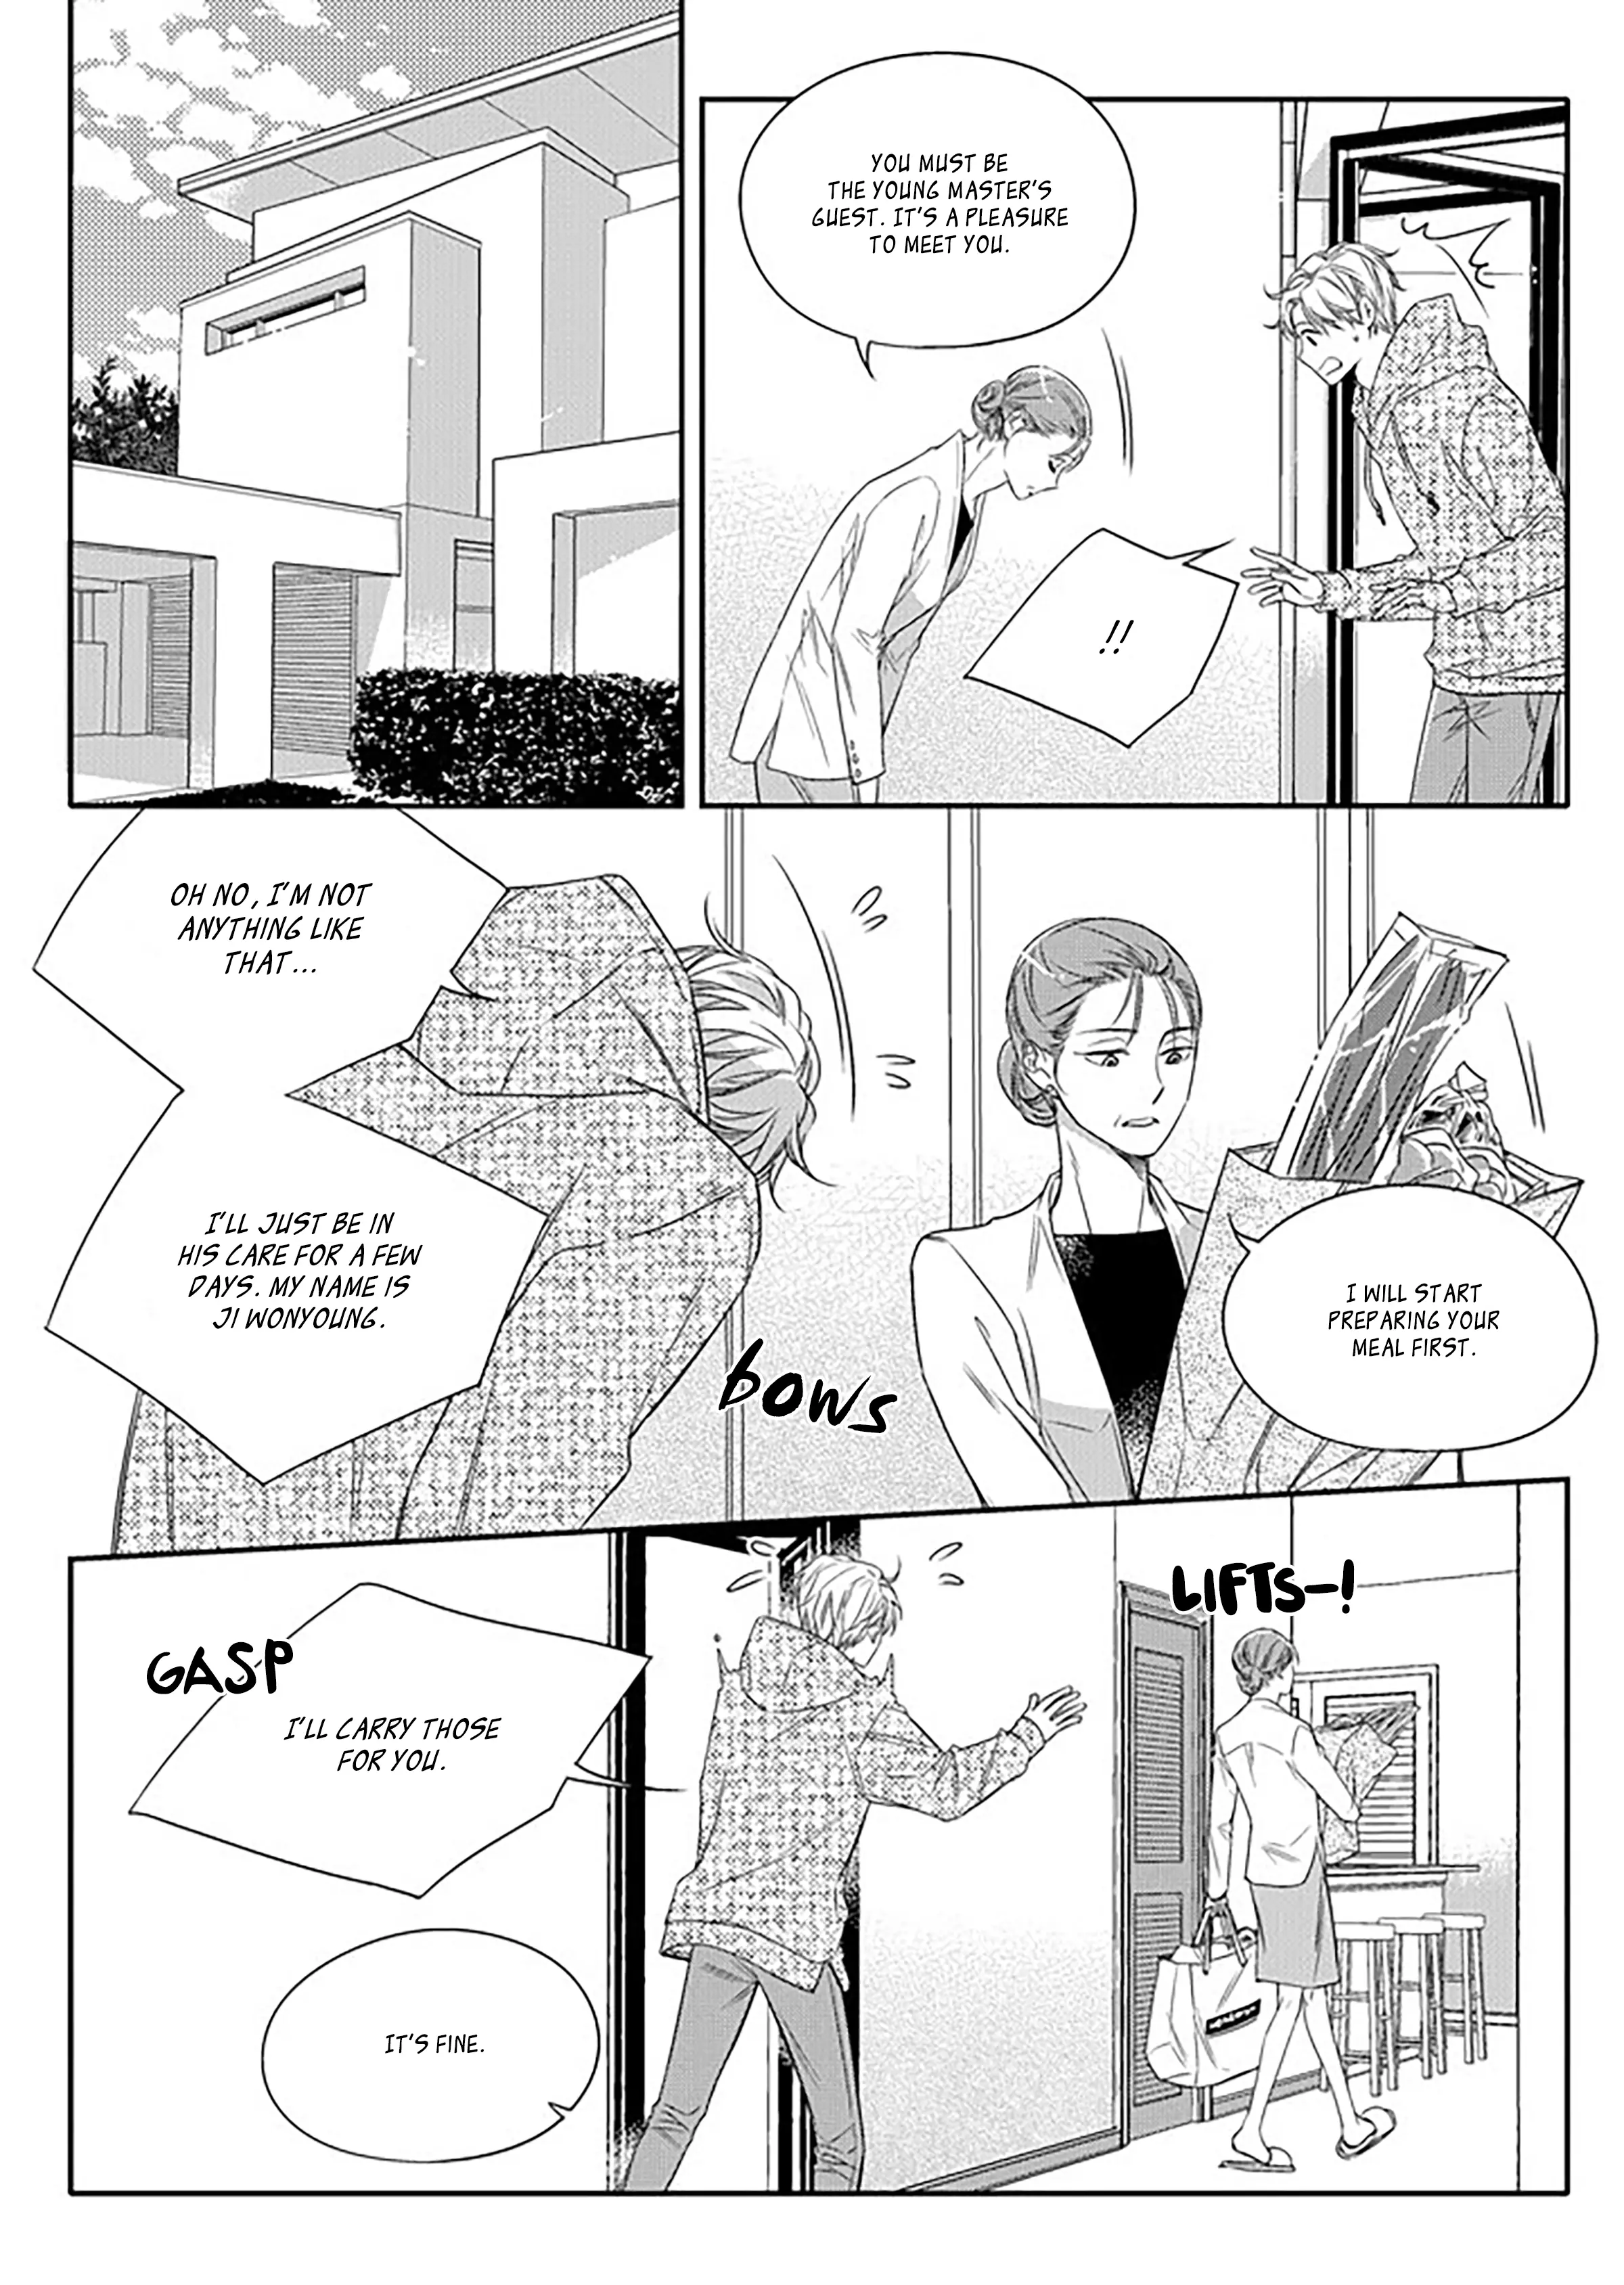 Unintentional Love Story - 11 page 7